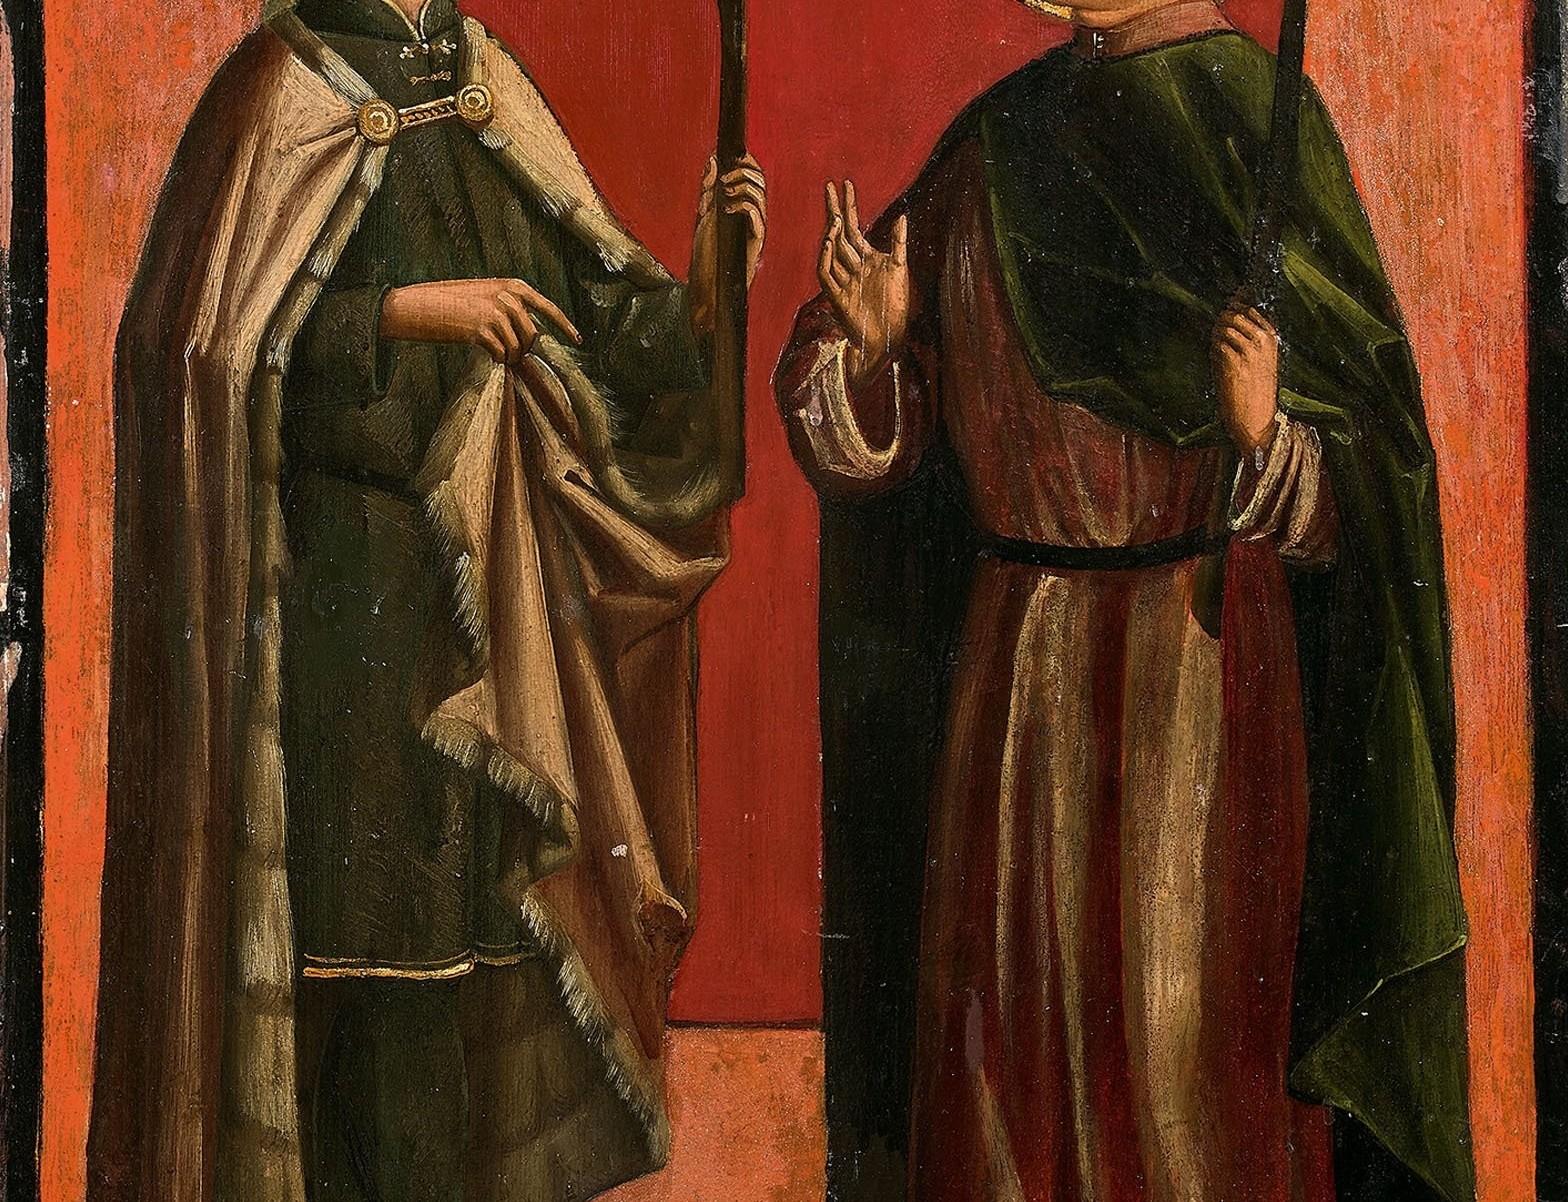 German school from XVIth century
Saint Acharius et saint Camomus, circa 1500

Oil on panel
Unsigned
On wooden panel size 85 x 54 cm (c. 33 x 21 in)

Provenance : Private collection, Monaco

Good condition : few lacks of paints and some light cracks